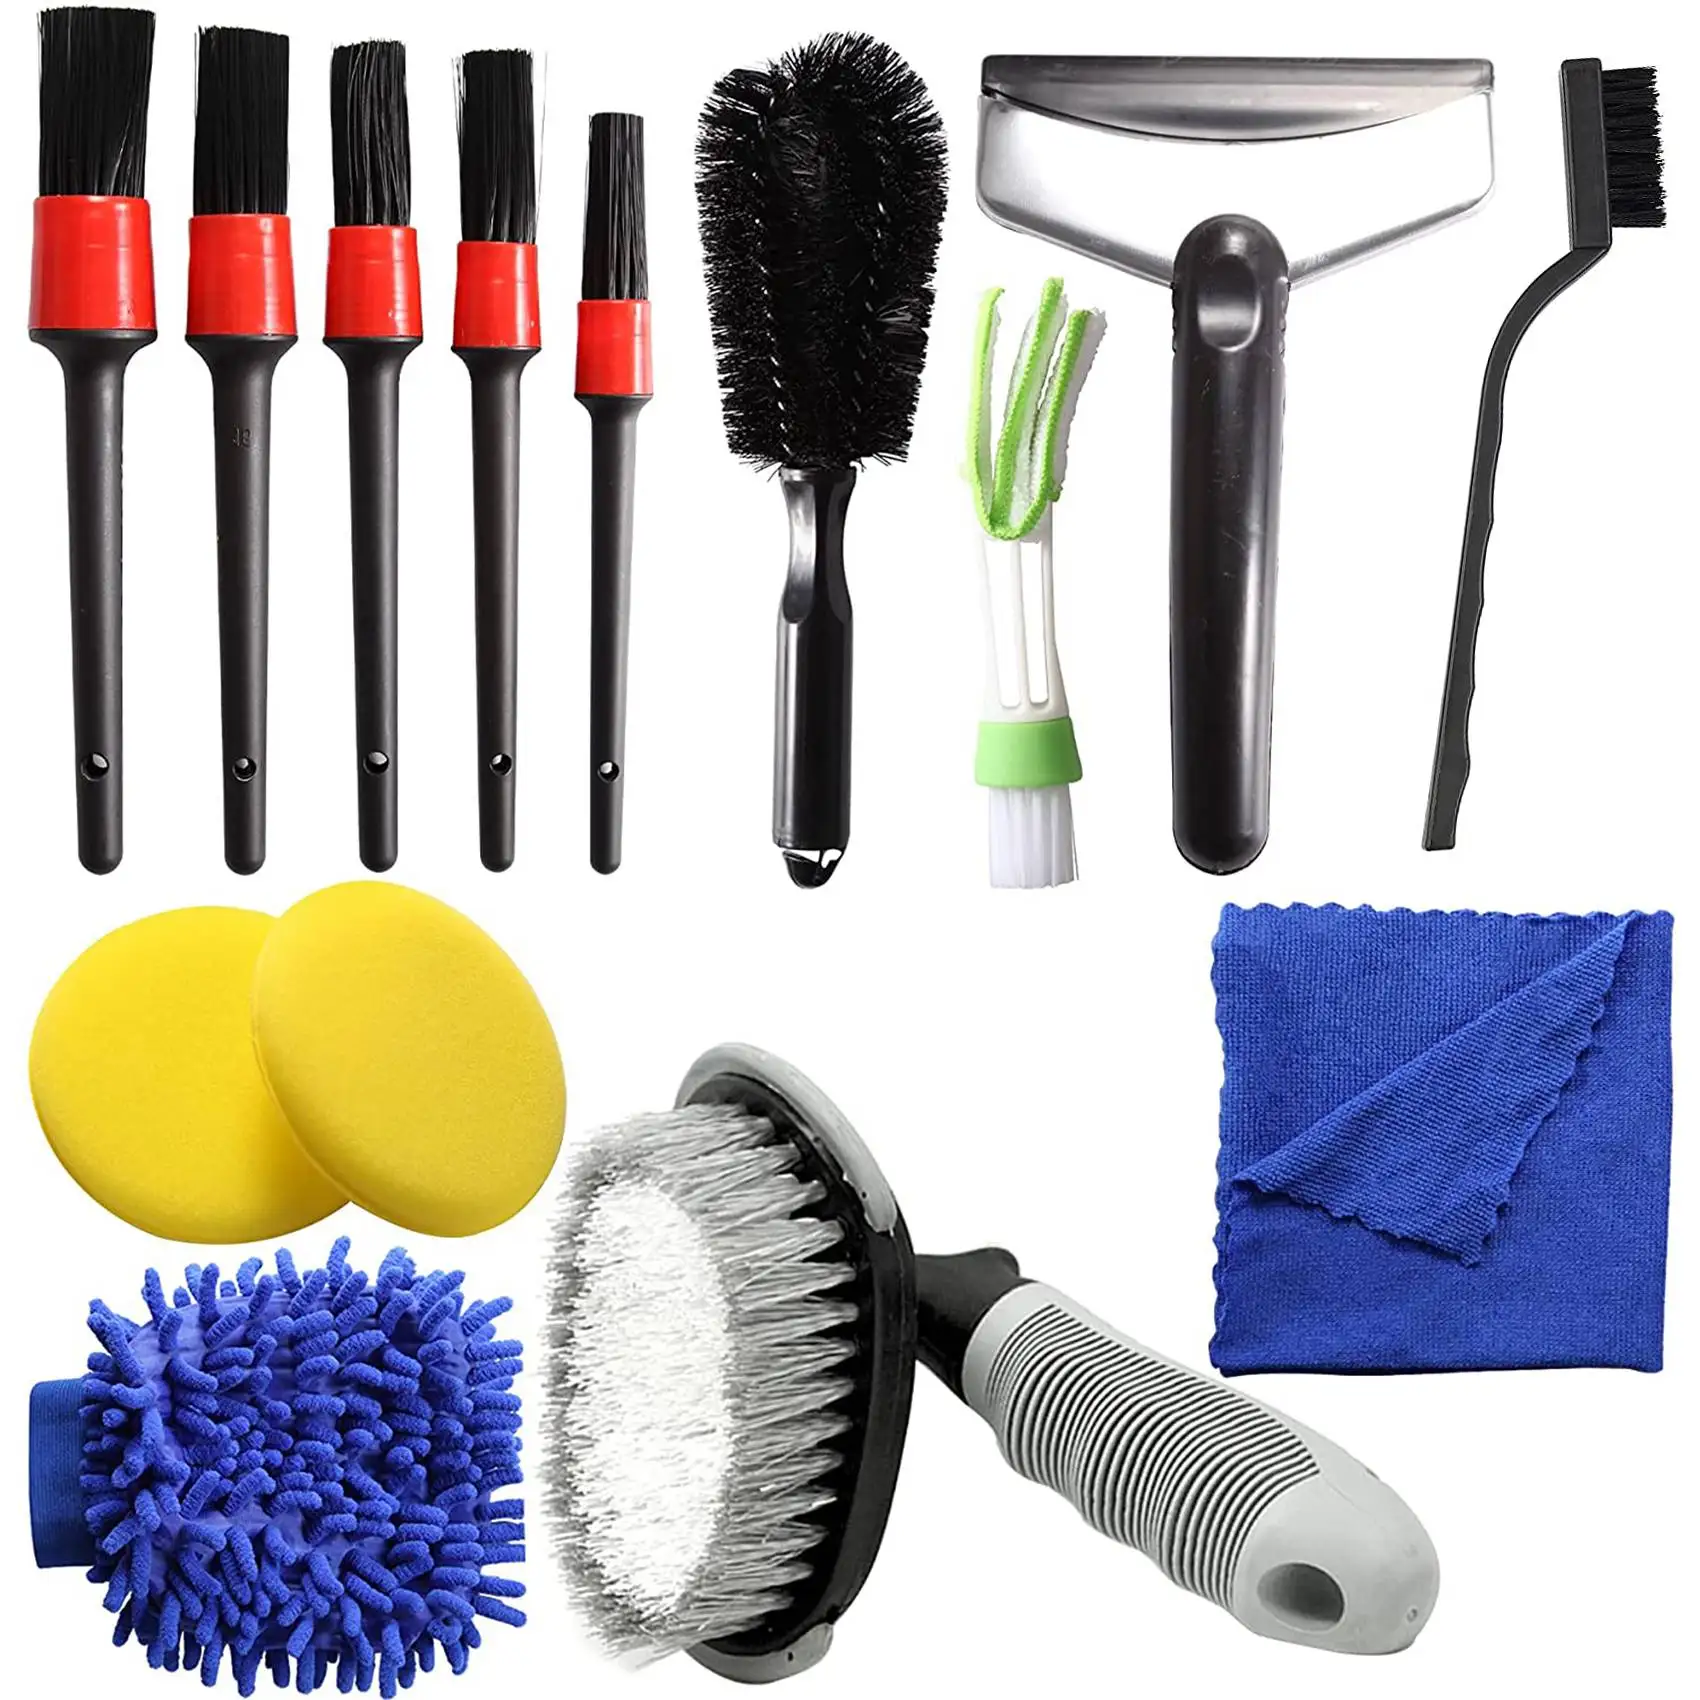 

14Pcs Car Wash Cleaning Tools Set Air Vents Detailing Brushes Ice Shove Gloves Applicator Pads Tire Brush Car Care Kit